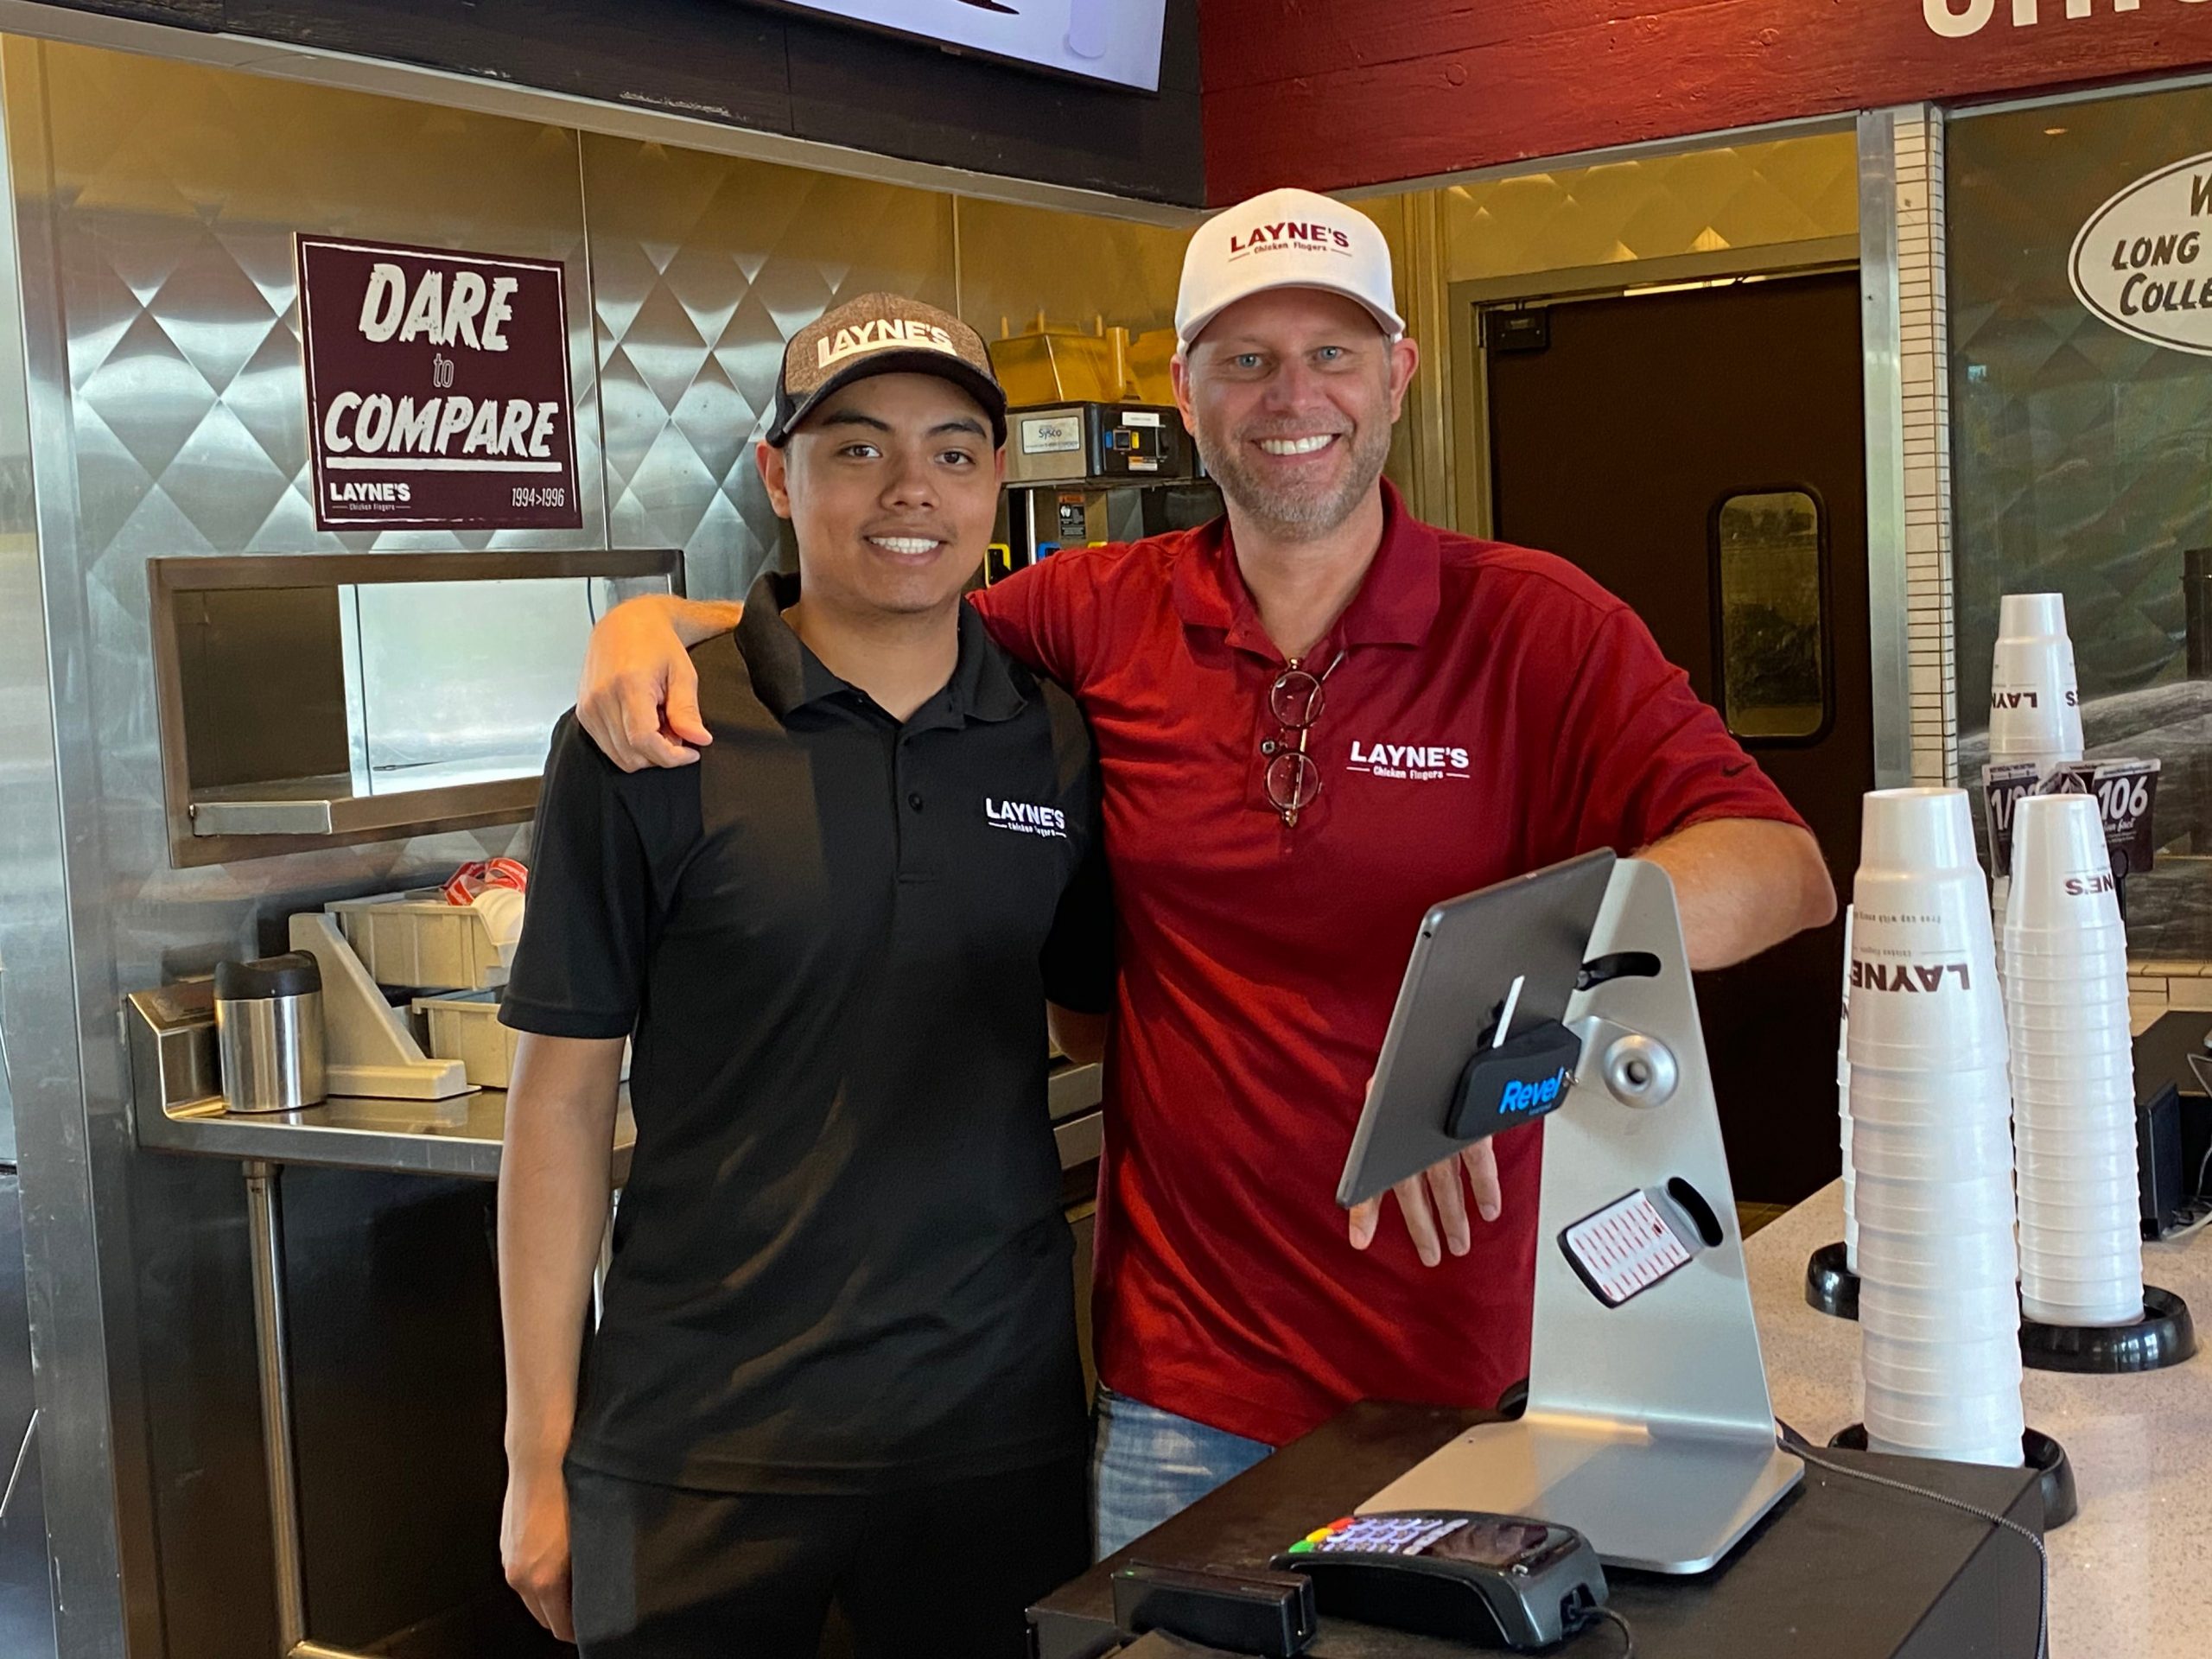 Two men stand behind the counter at a fast food restaurant smiling at the camera with their arms around each other.